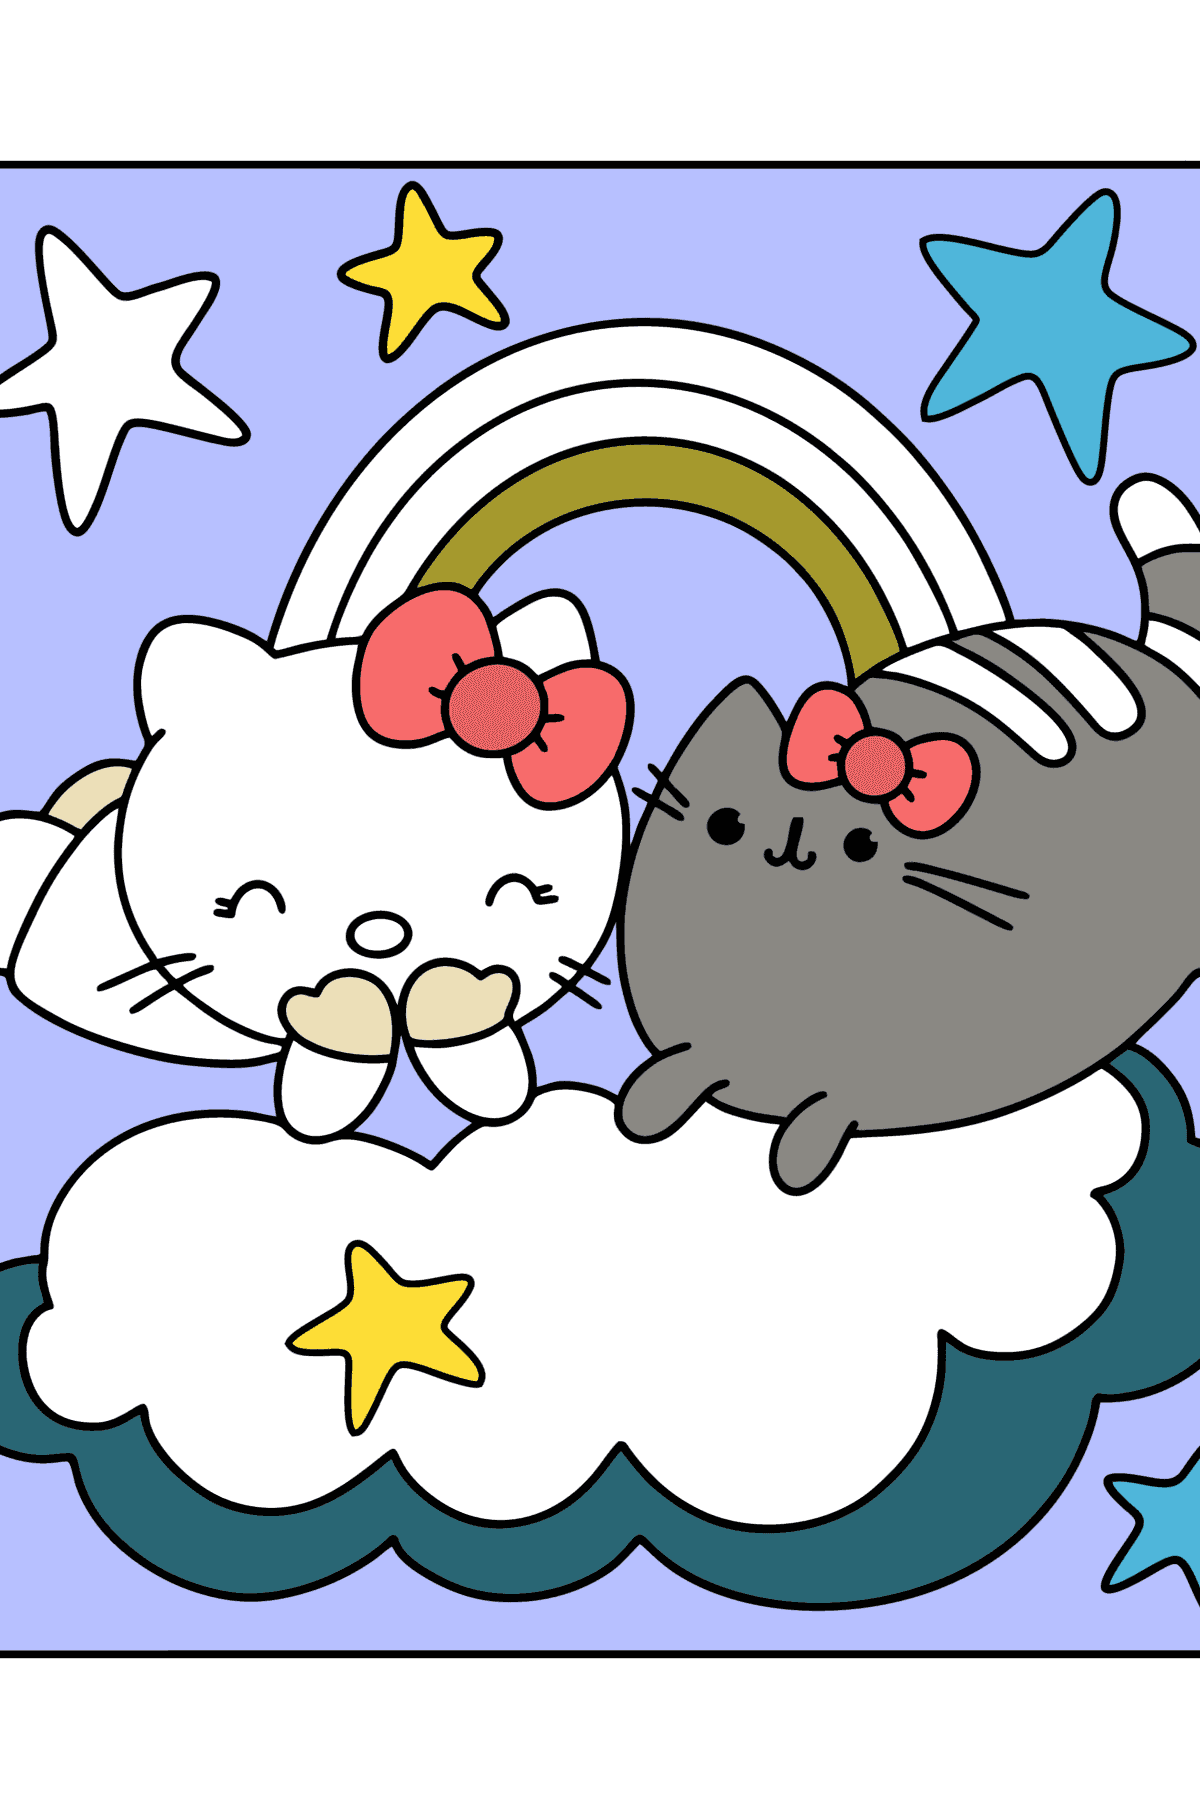 Pusheen and Hello Kitty сoloring page - Coloring Pages for Kids